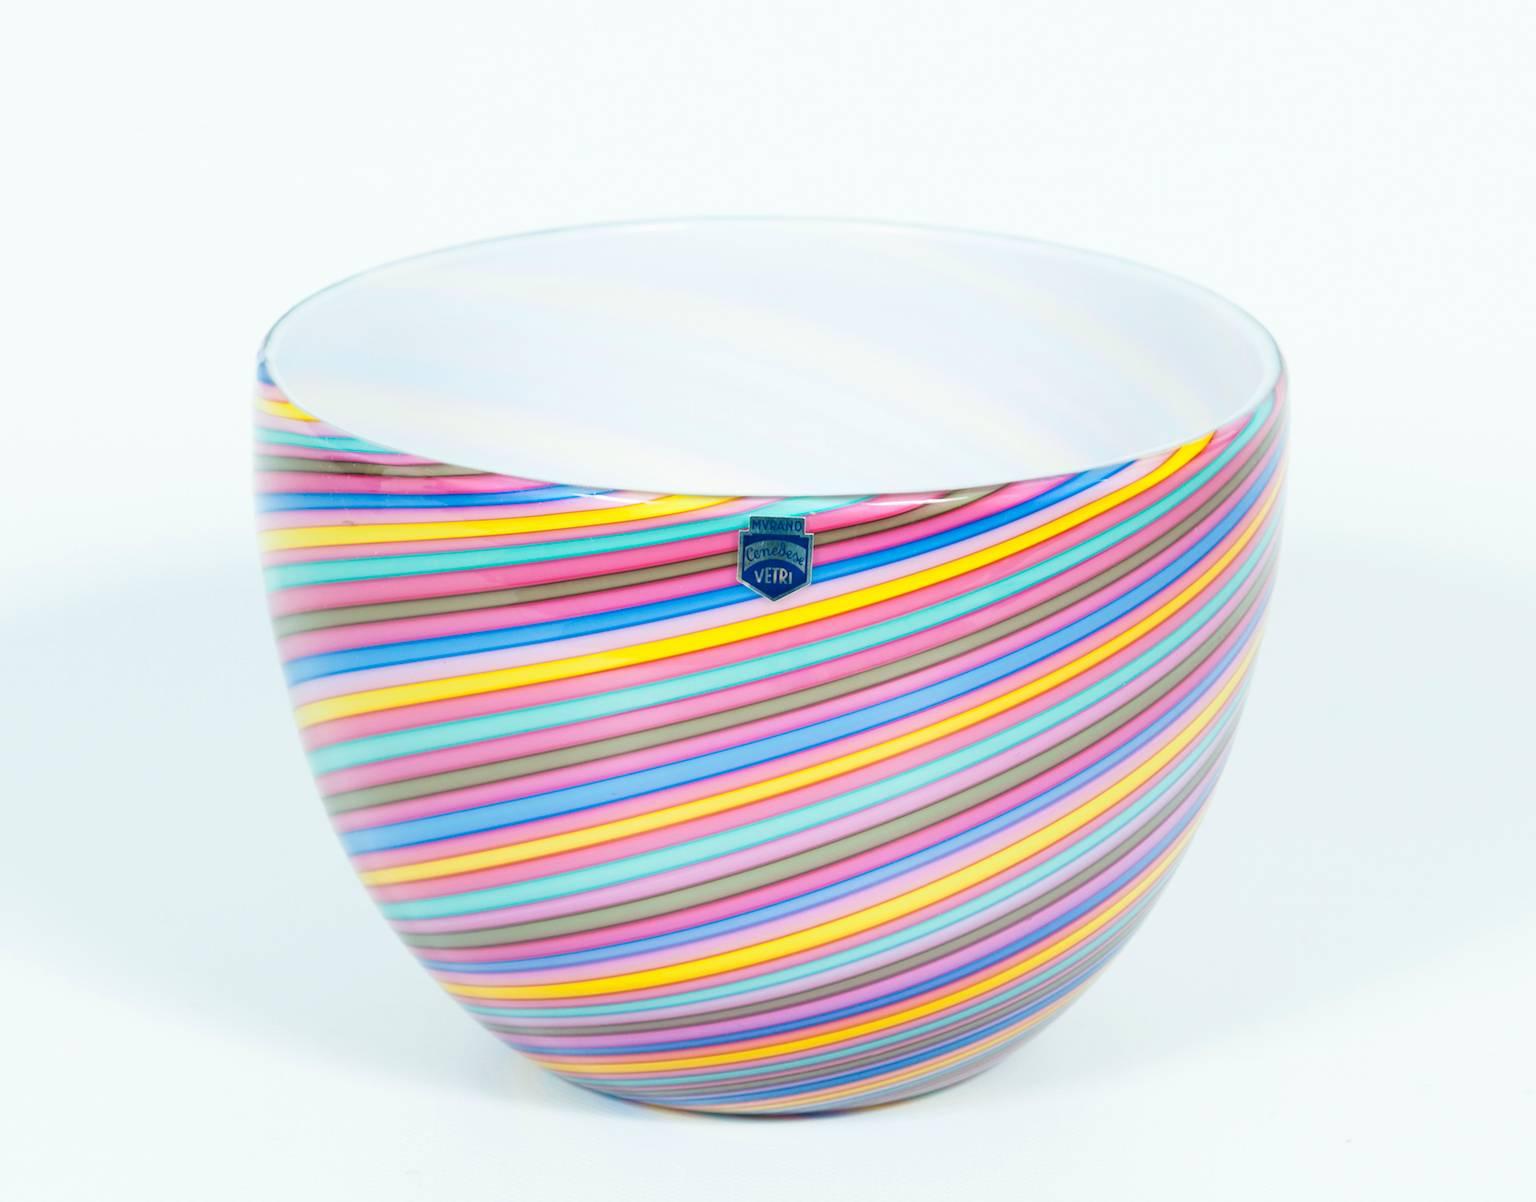 Elegant Italian Murano glass bowls with multicolors twisted stripes, in very excellent original condition with the original label of the maker. Made circa 1970s by glassmaker Cenedese and signed in the bottom. The bowls are 6.30 inch high, by 8.27